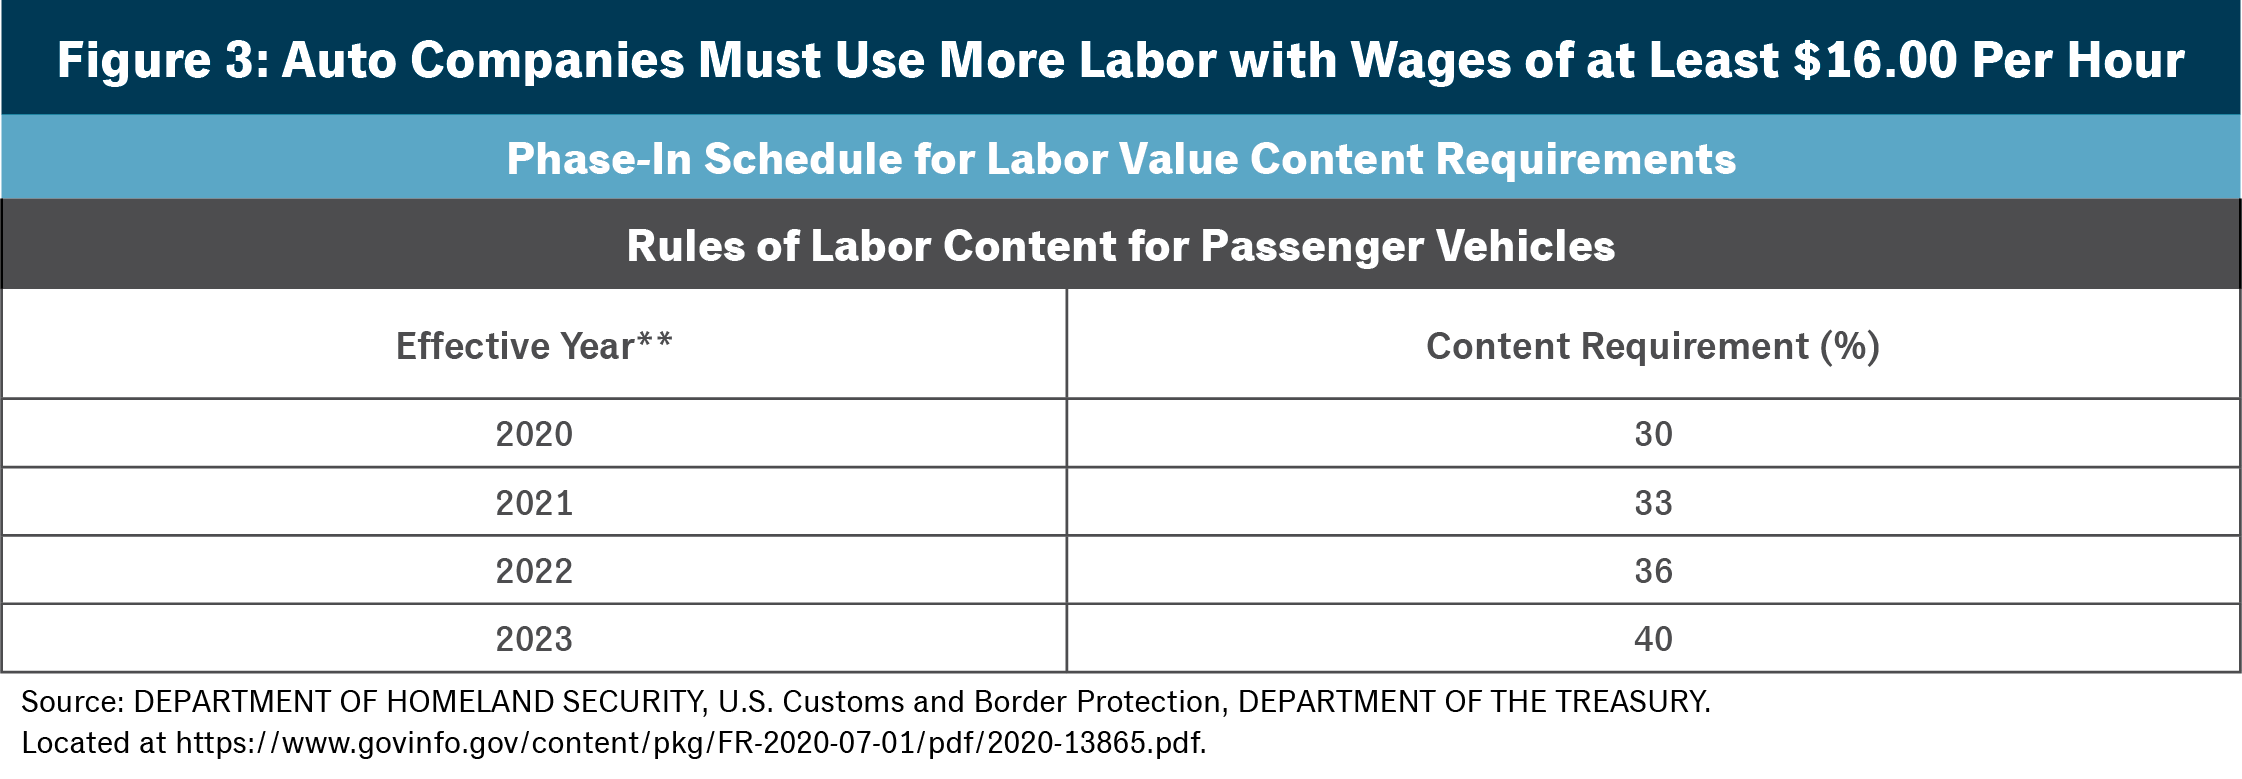 Figure 3: Auto Companies Must Use More Labor with Wages of at Least $16.00 Per Hour